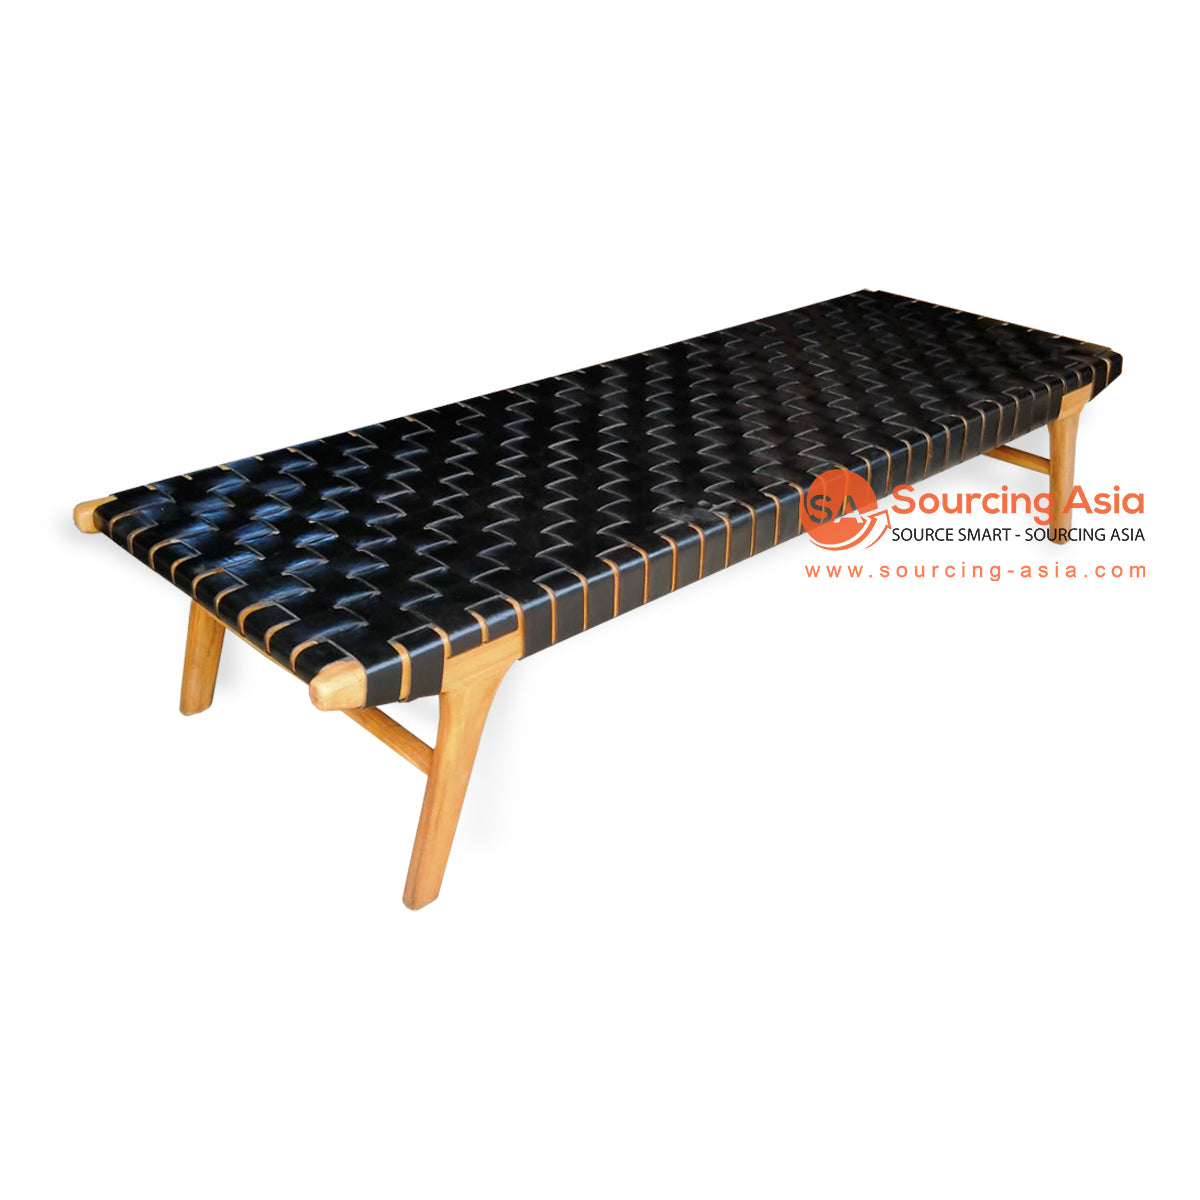 IJF015 BLACK WOVEN LEATHER AND TEAK WOOD BED END BENCH